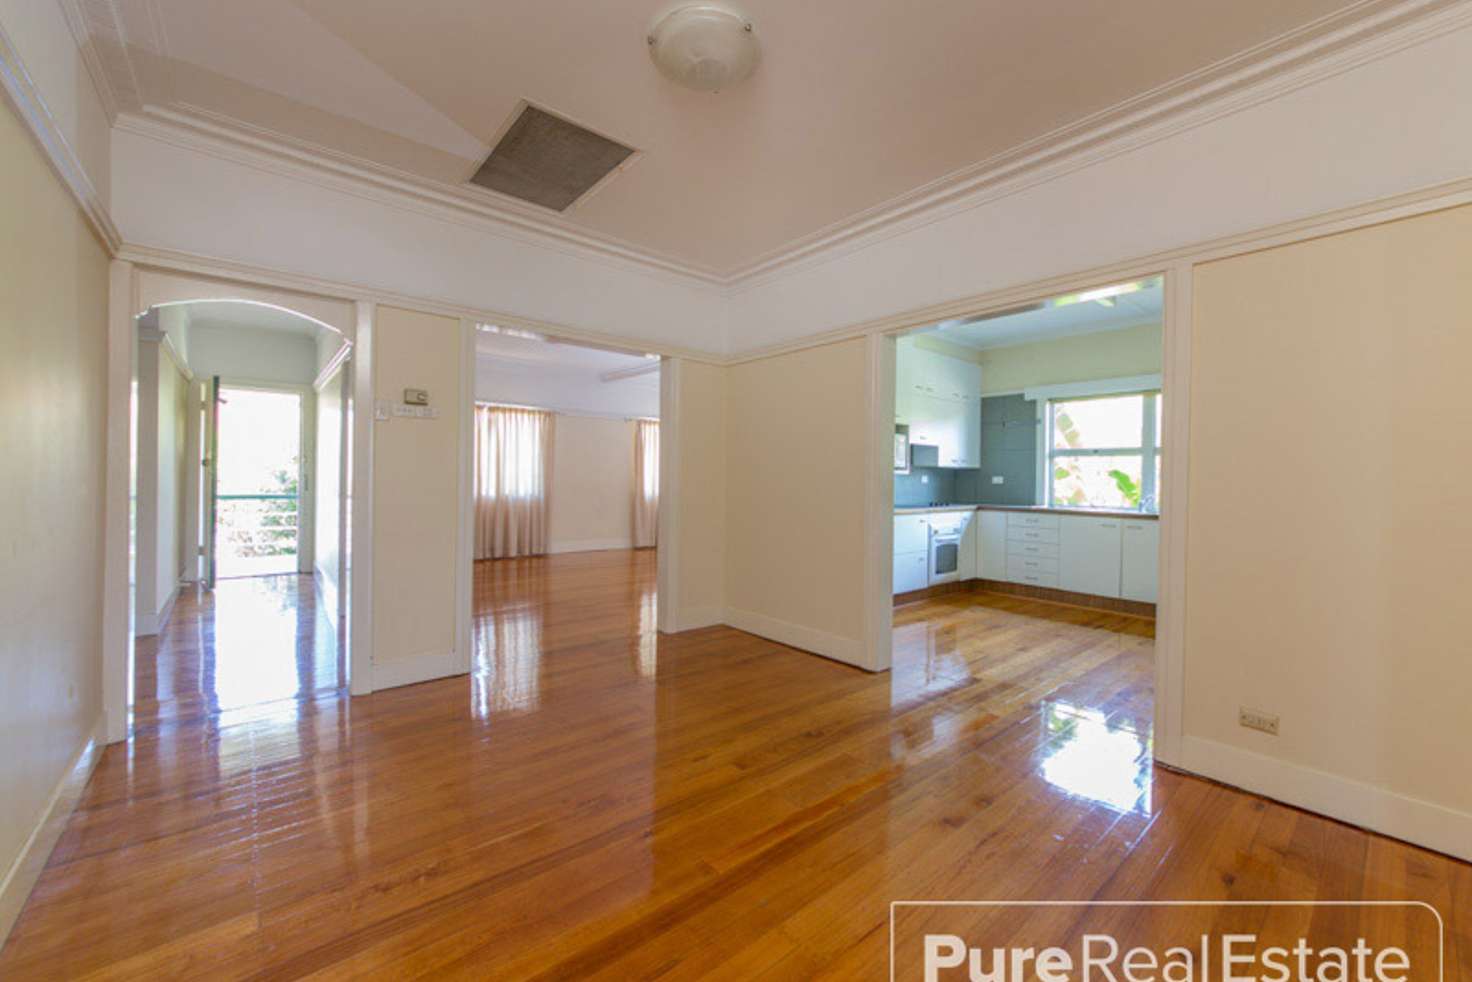 Main view of Homely house listing, 29 Weal Avenue, Tarragindi QLD 4121